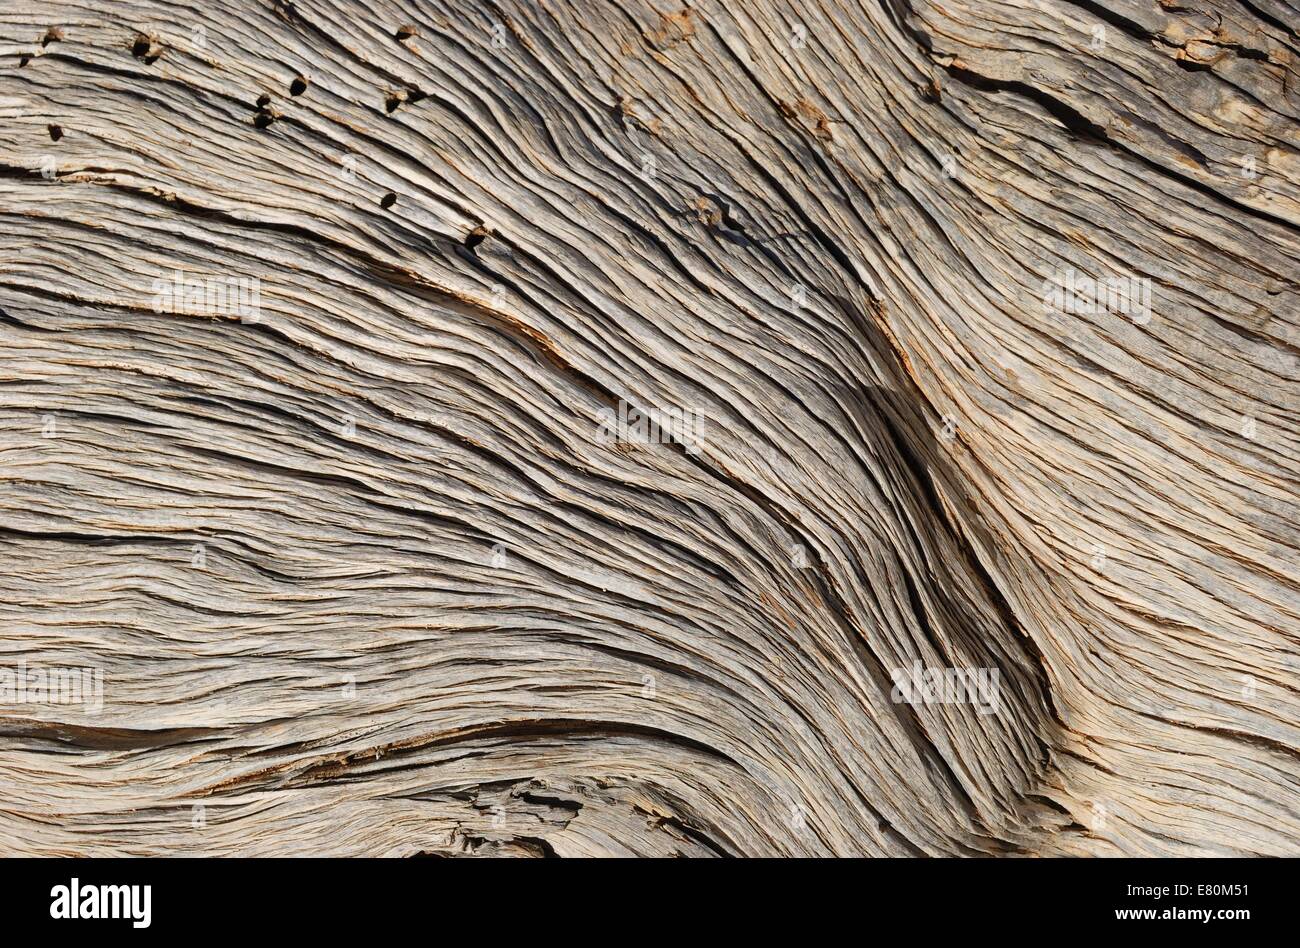 Texture of wood on ancient Bristlecone pine in Bryce Canyon national park, Utah, USA Stock Photo